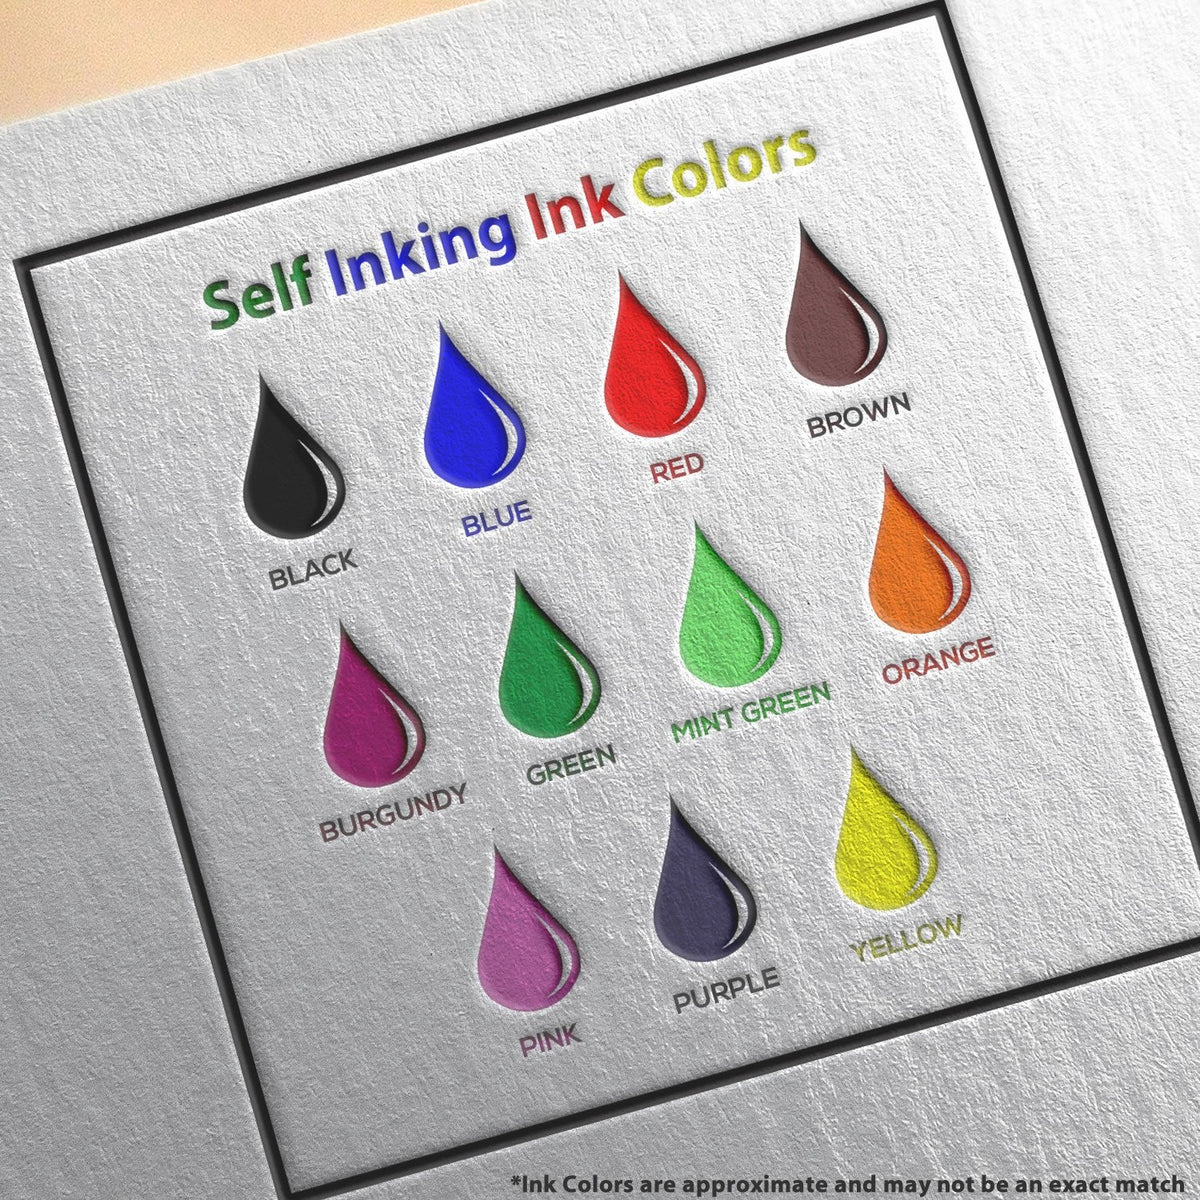 Self-Inking No Mail Receptacle Stamp Ink Color Options